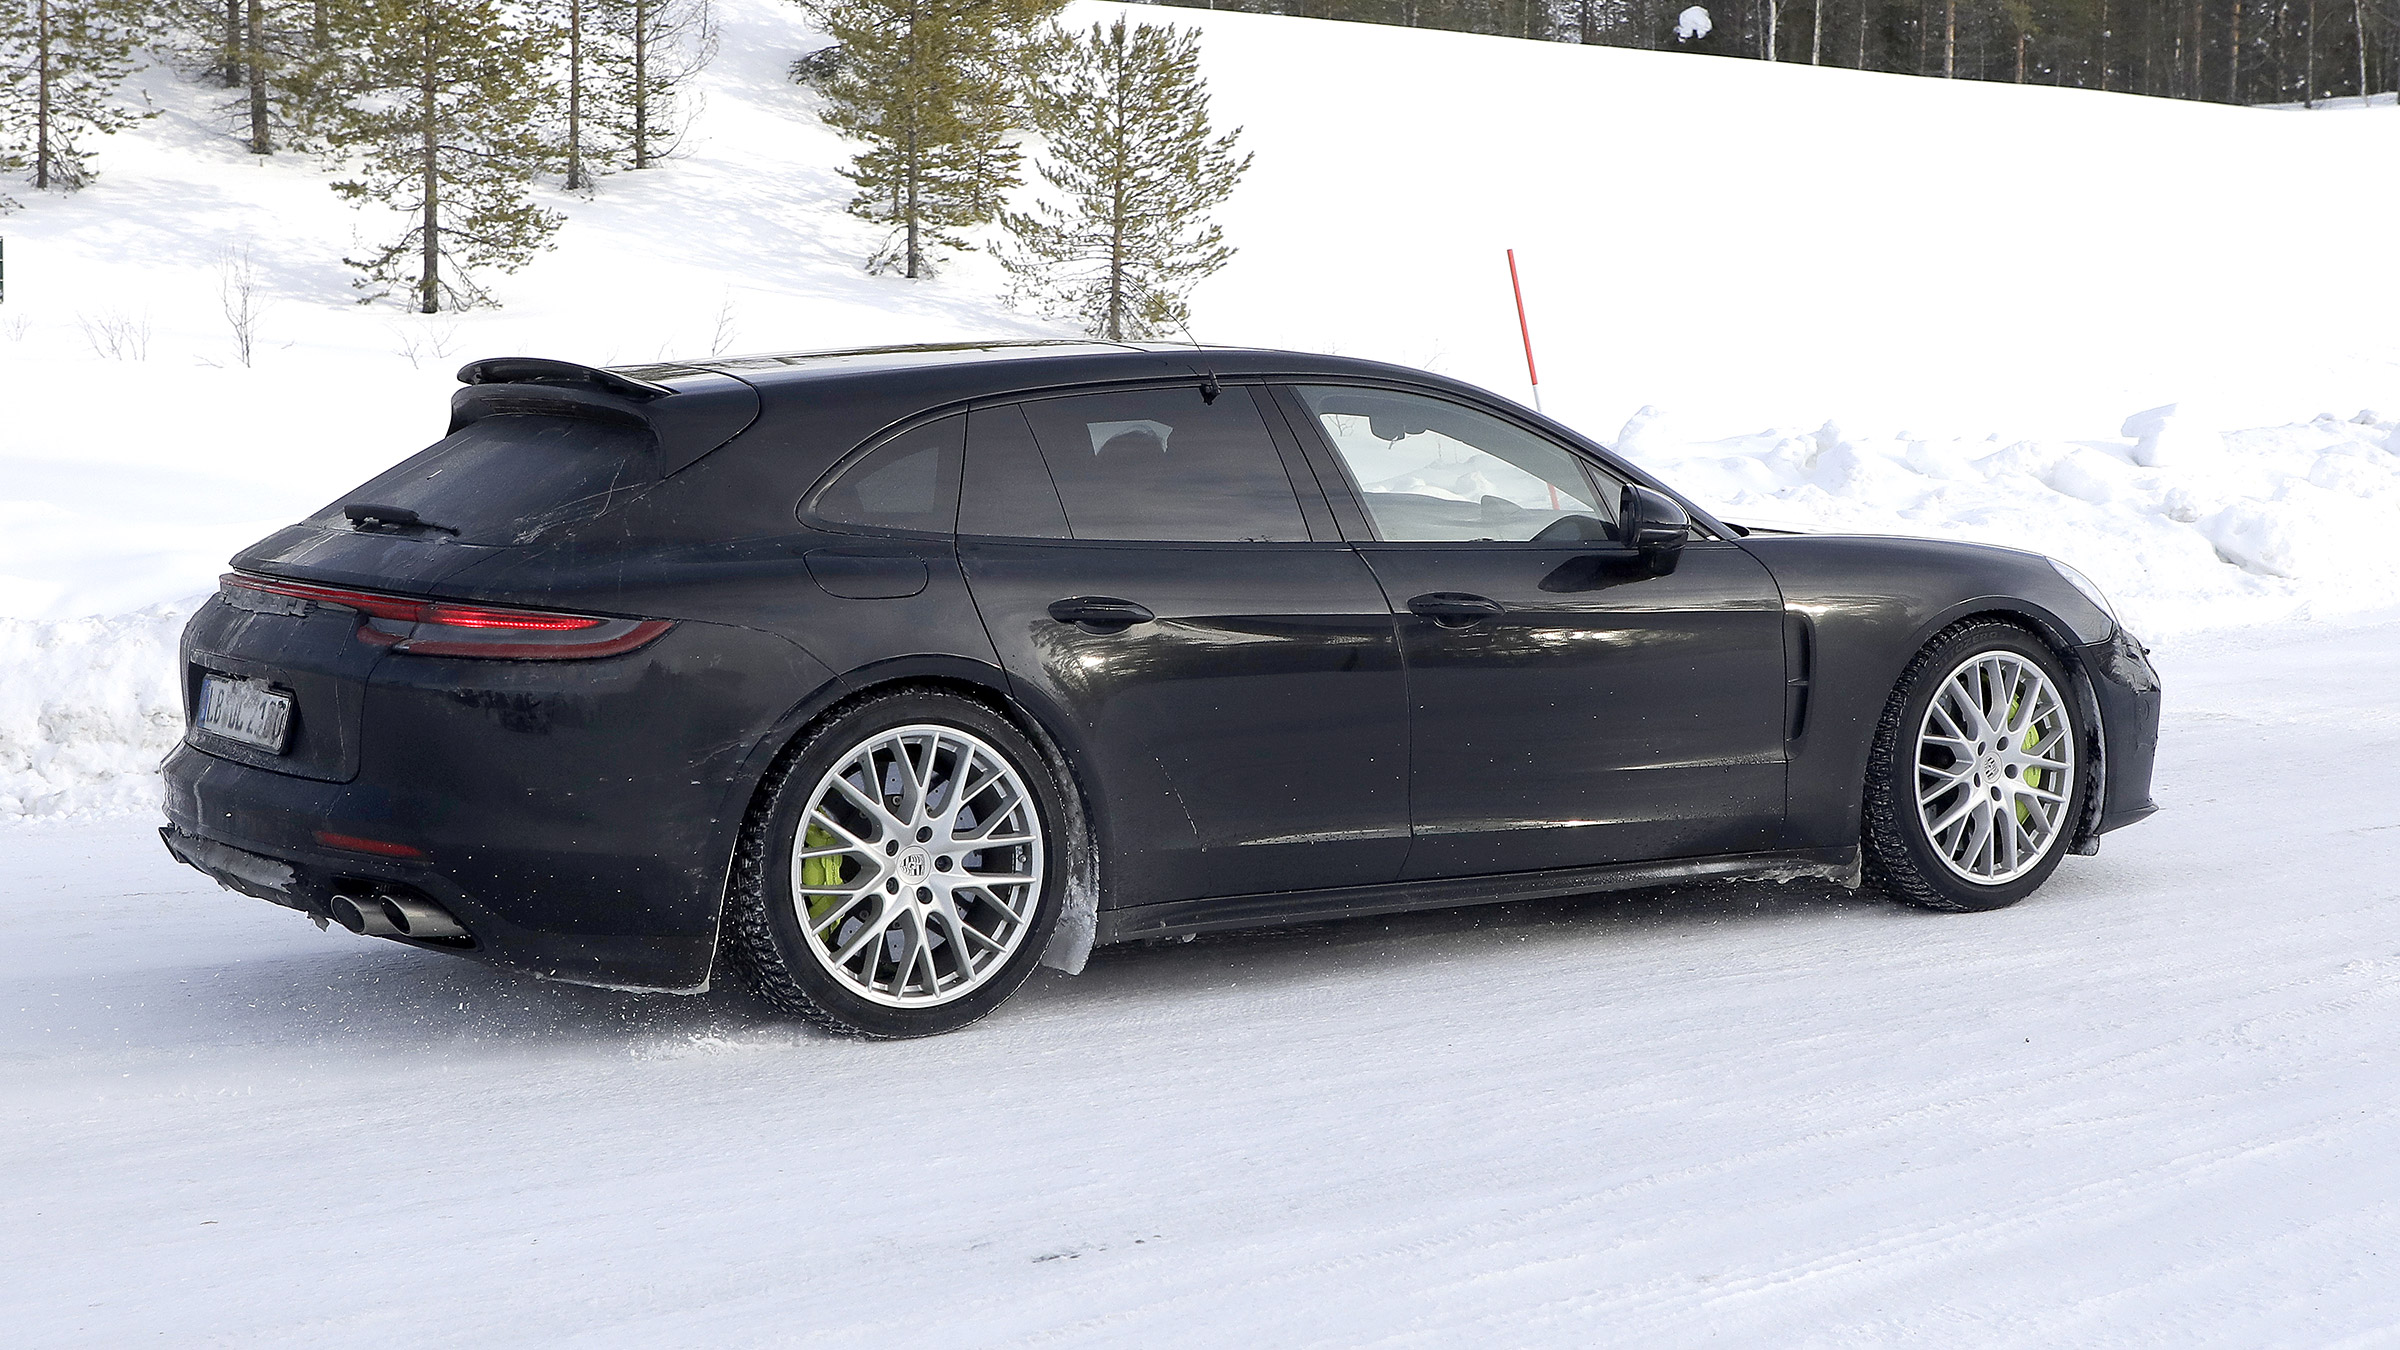 New Porsche Panamera Sport Turismo spied with fresh styling - pictures | evo